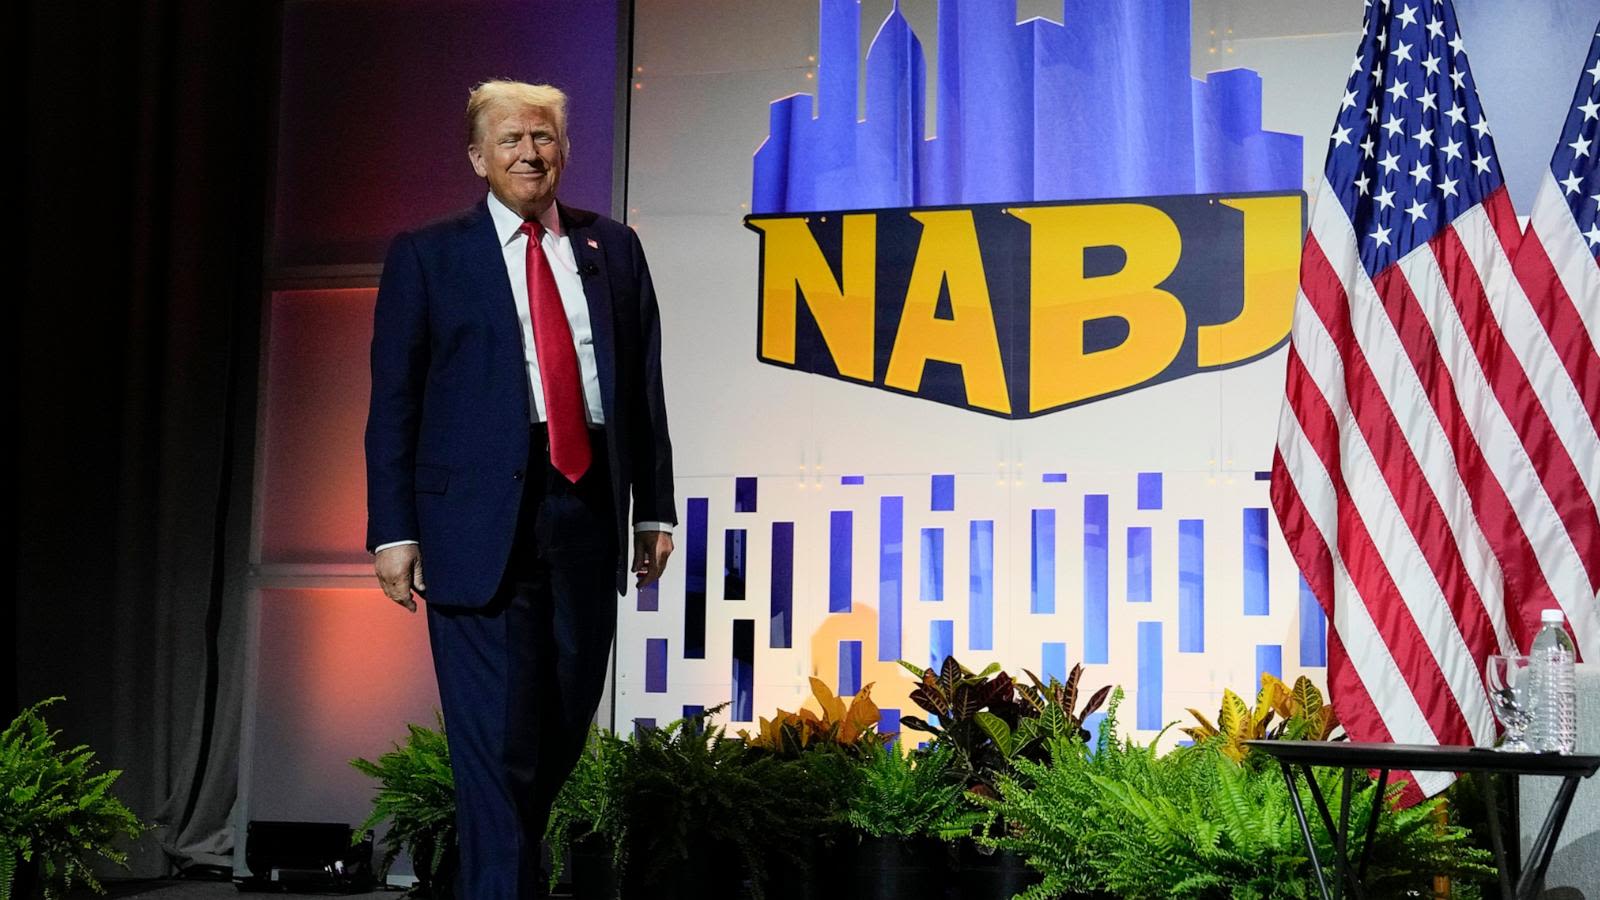 Trump falsely questions Harris' race in NABJ interview, says VP pick 'does not have any impact'